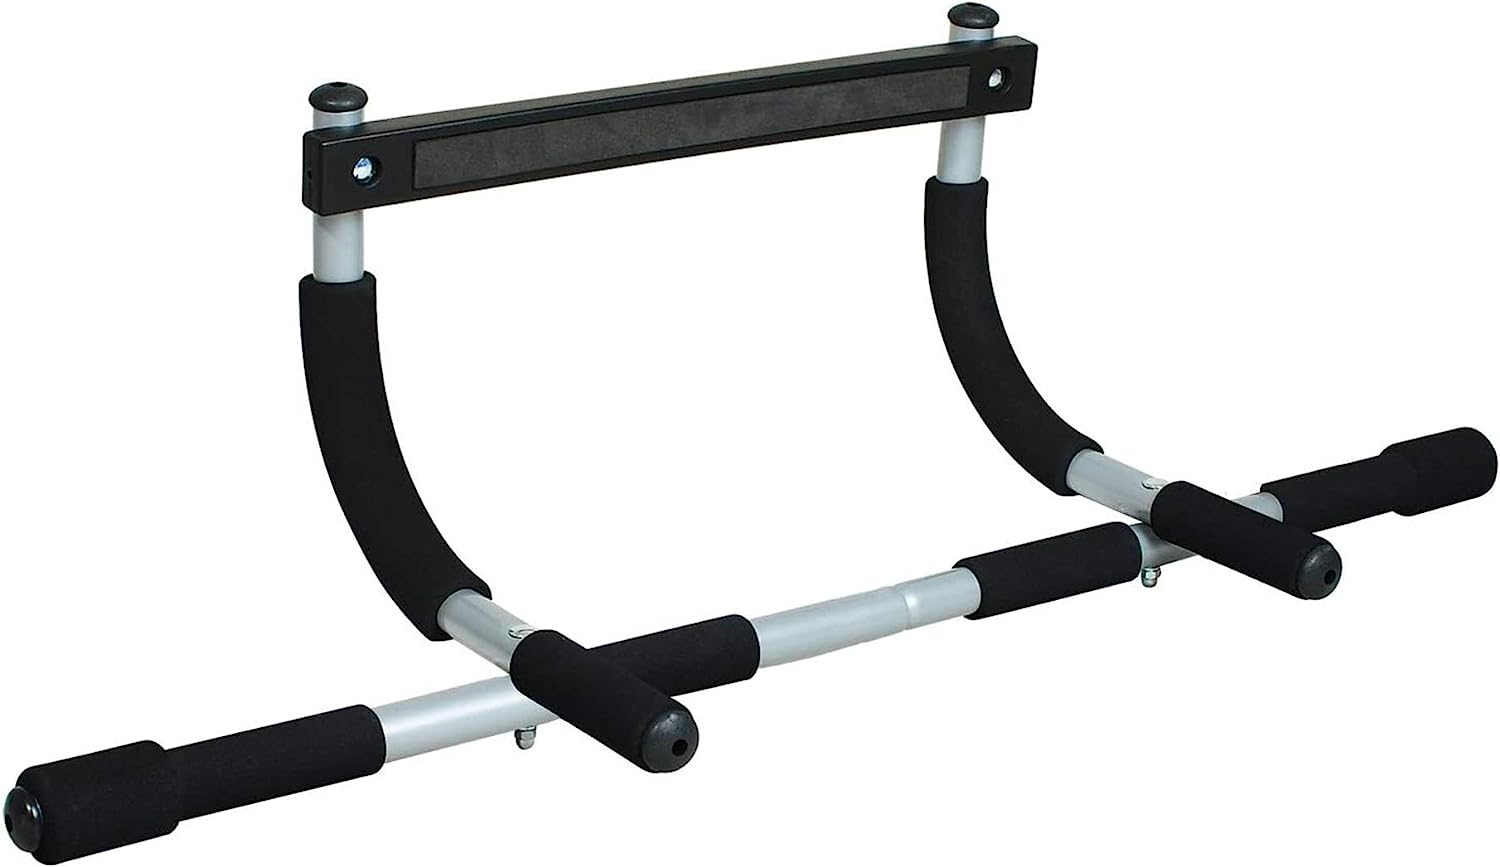 Iron Gym Pull-Up Bar - Total Upper Body Workout Bar [...]